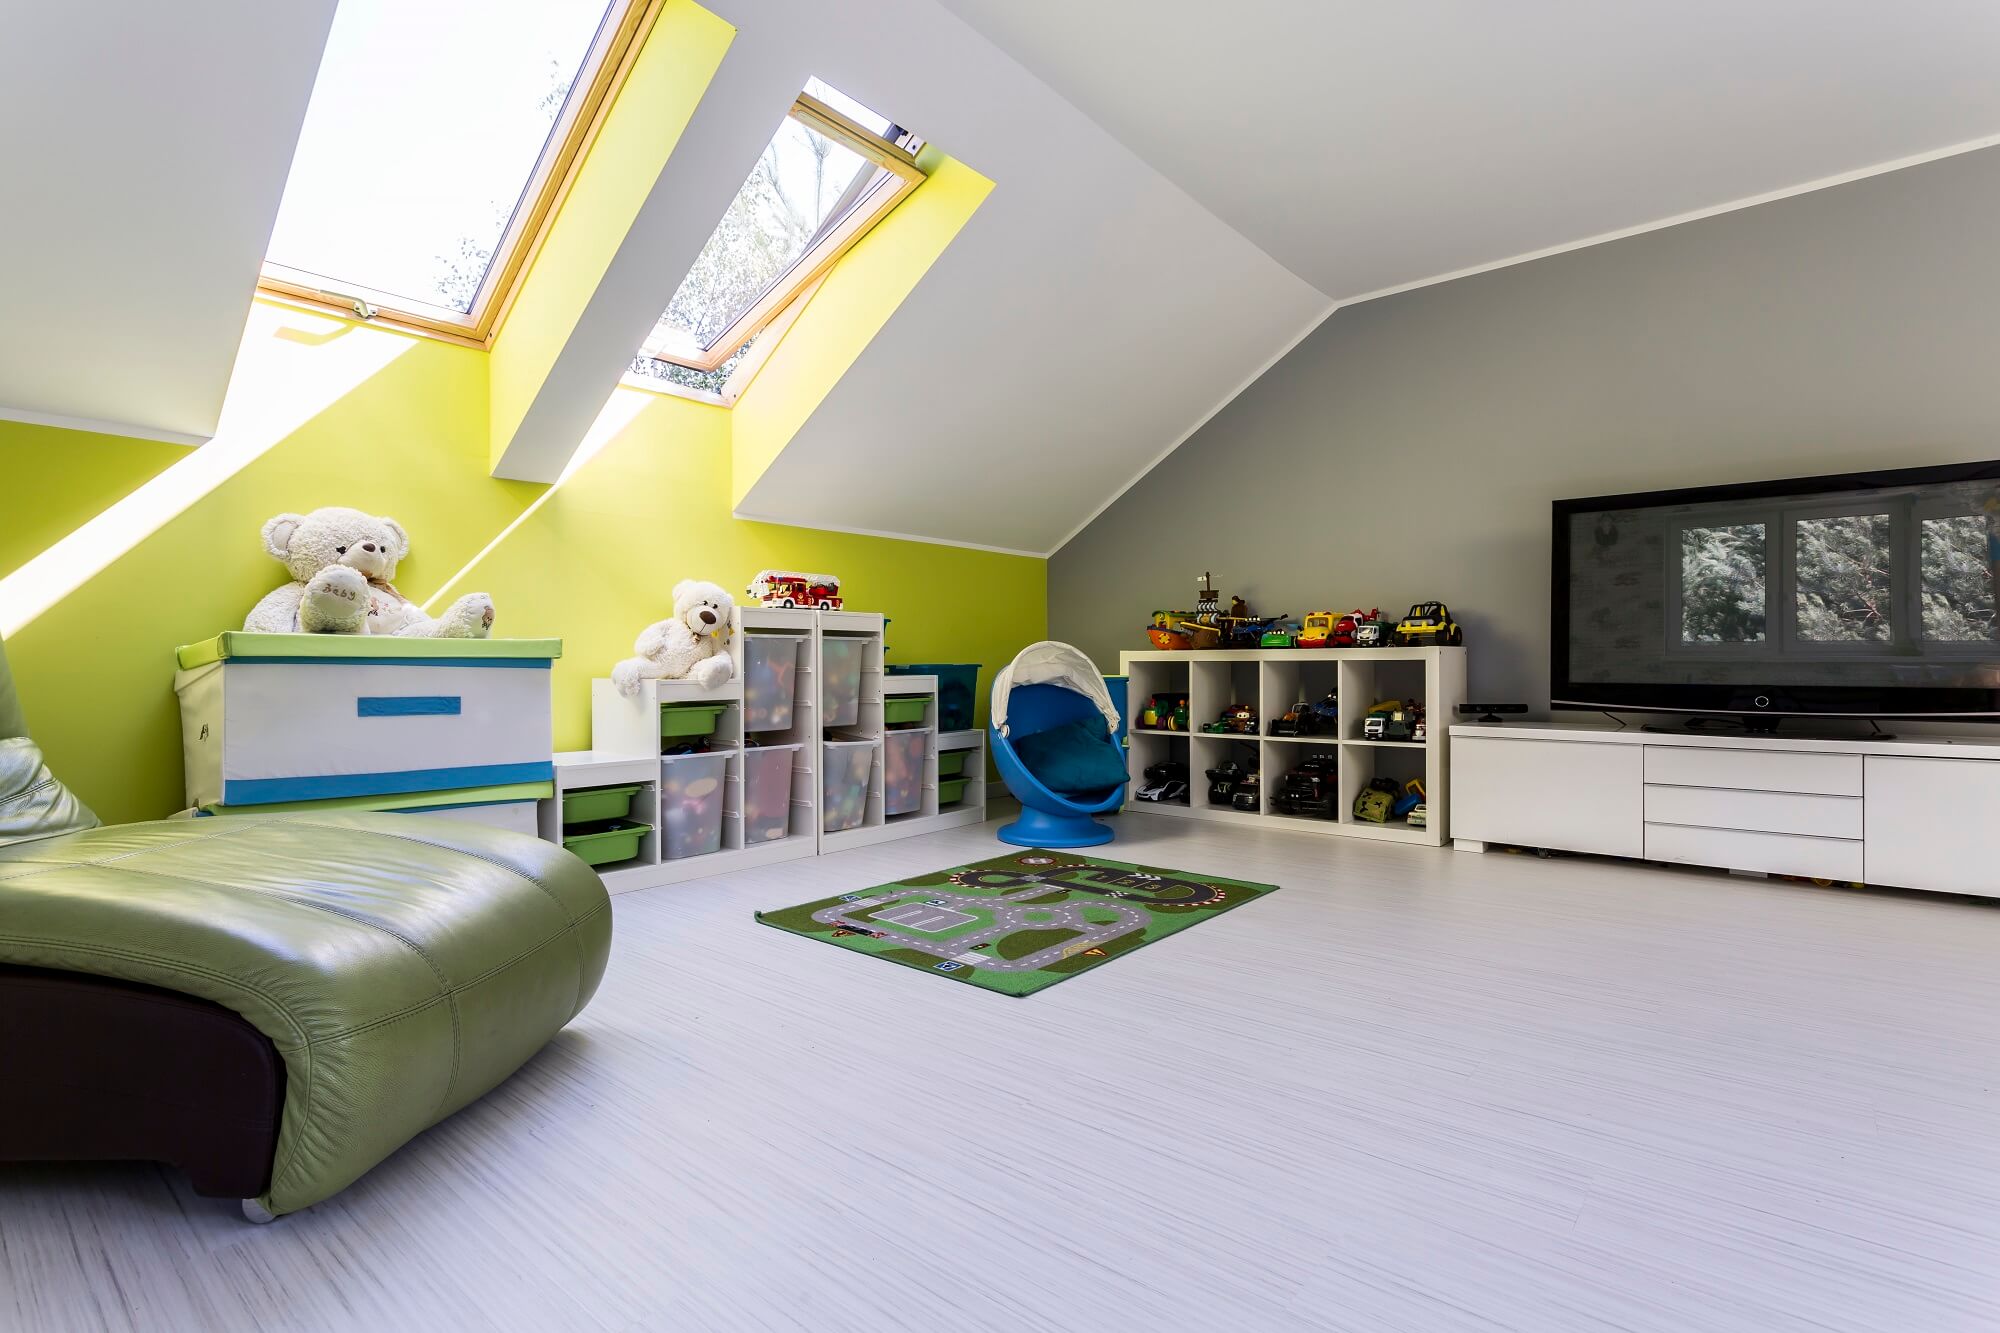 Child room at the attic with TV set, bed, chest of drawers and toys